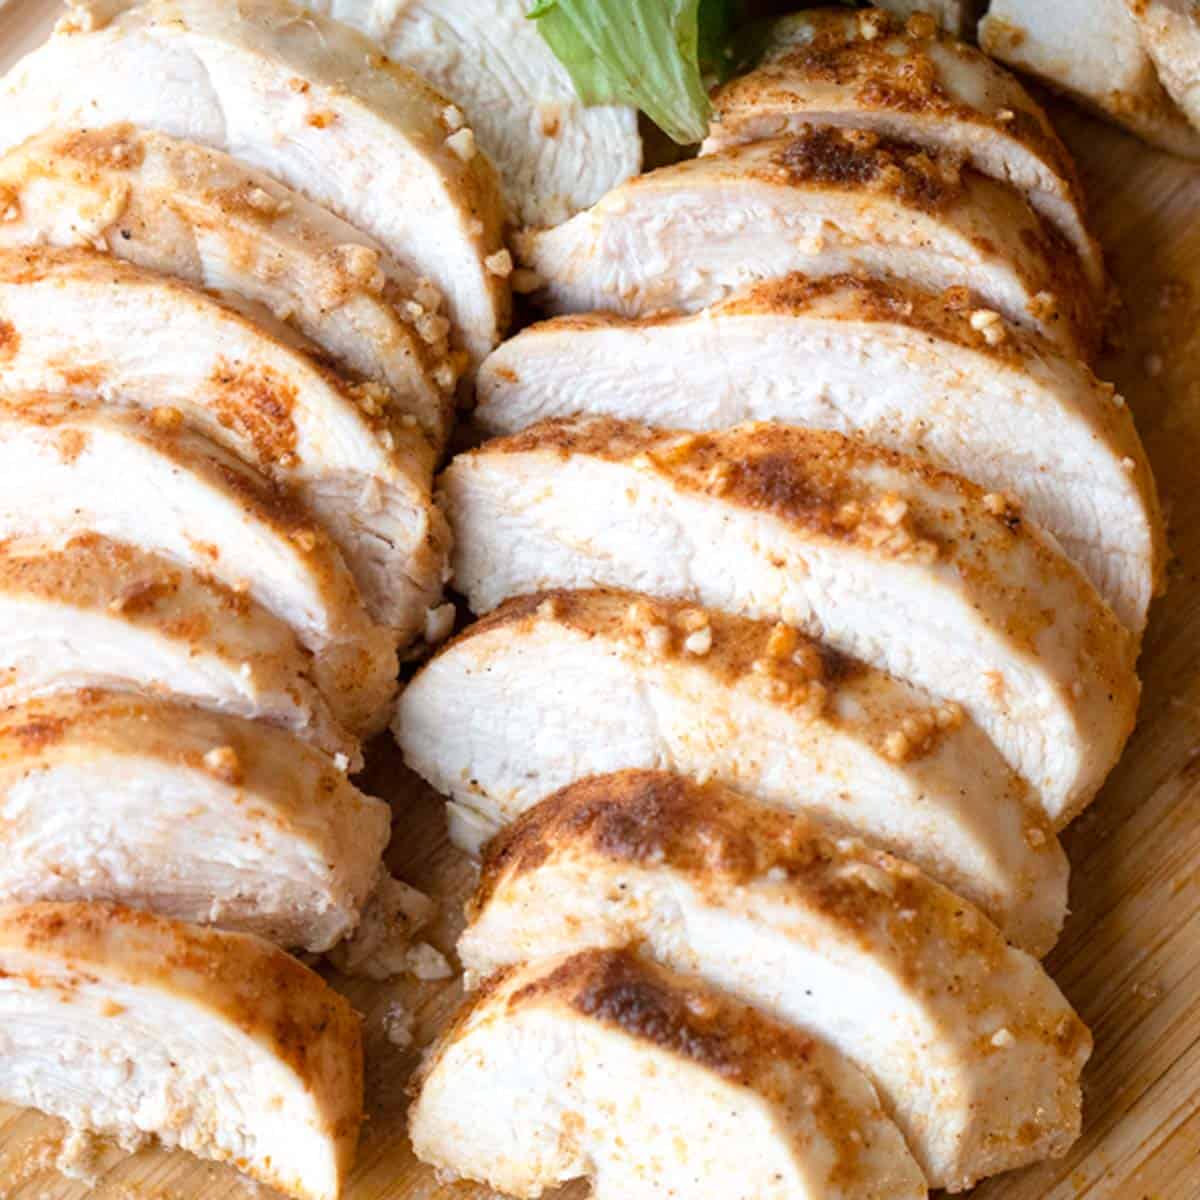 best baked chicken breast on a wood cutting board, oven baked boneless chicken breast.